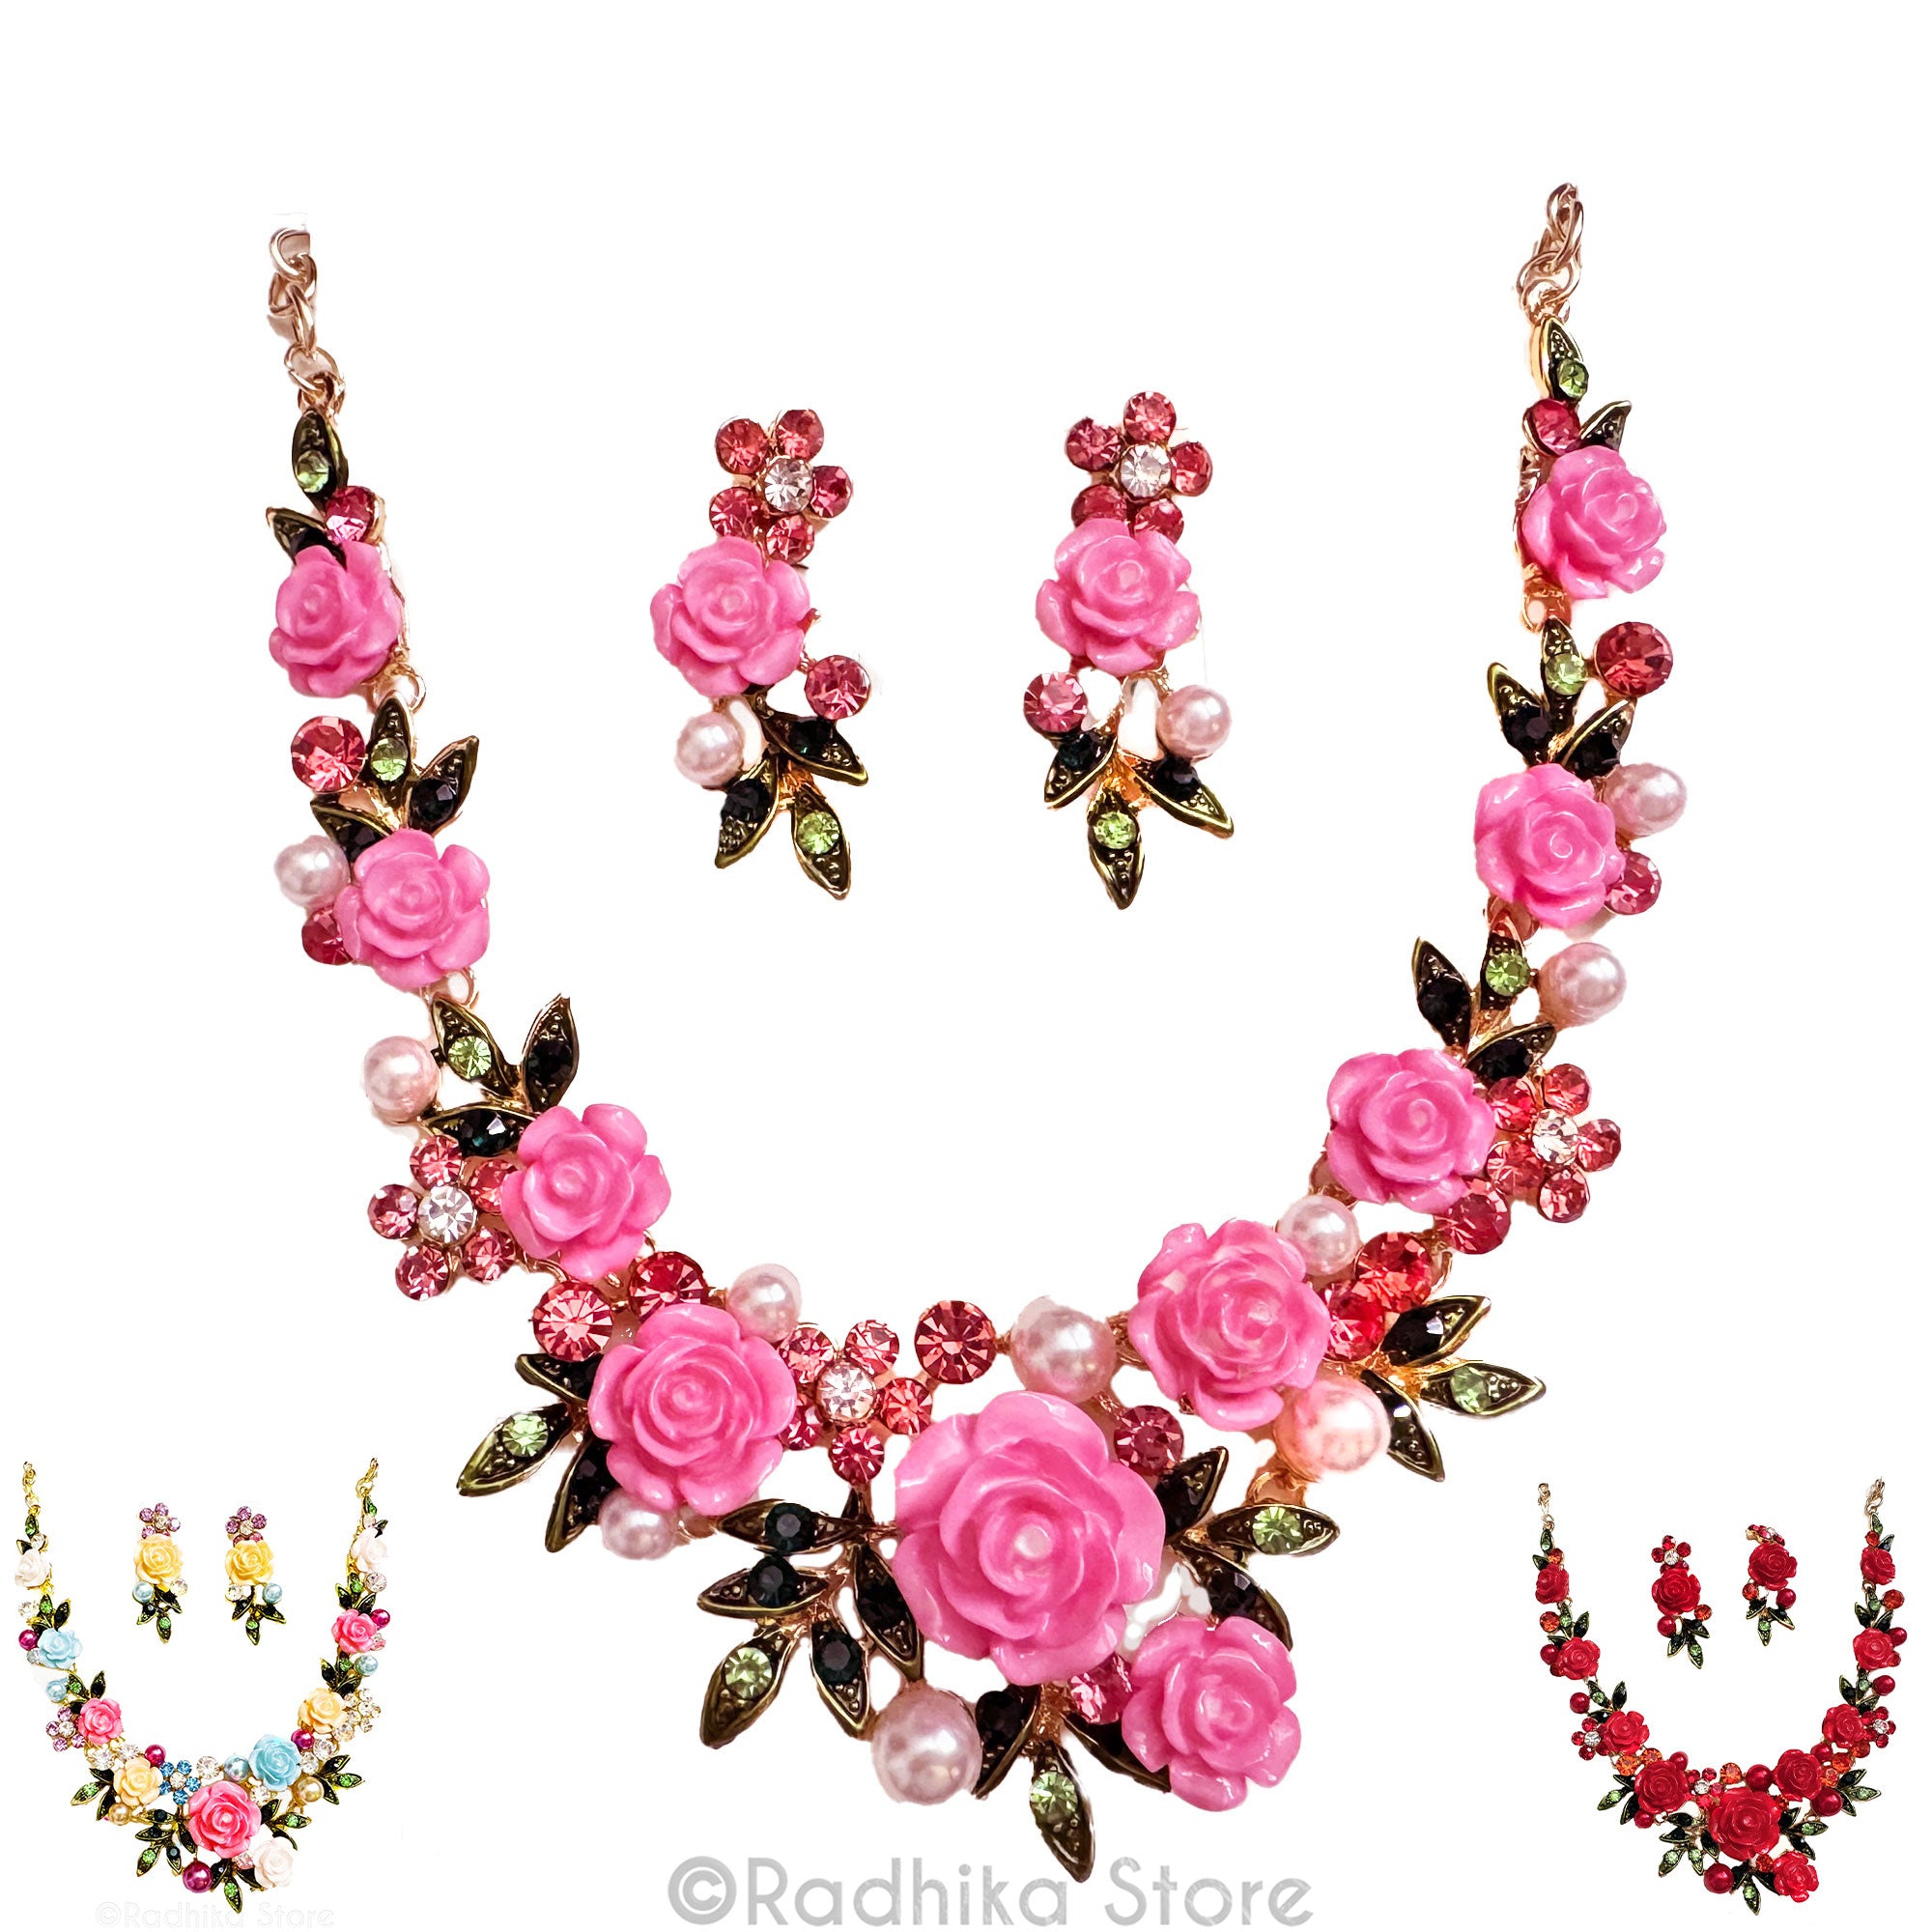 Jeweled Rose Garland- Deity Necklaces and Earring Set